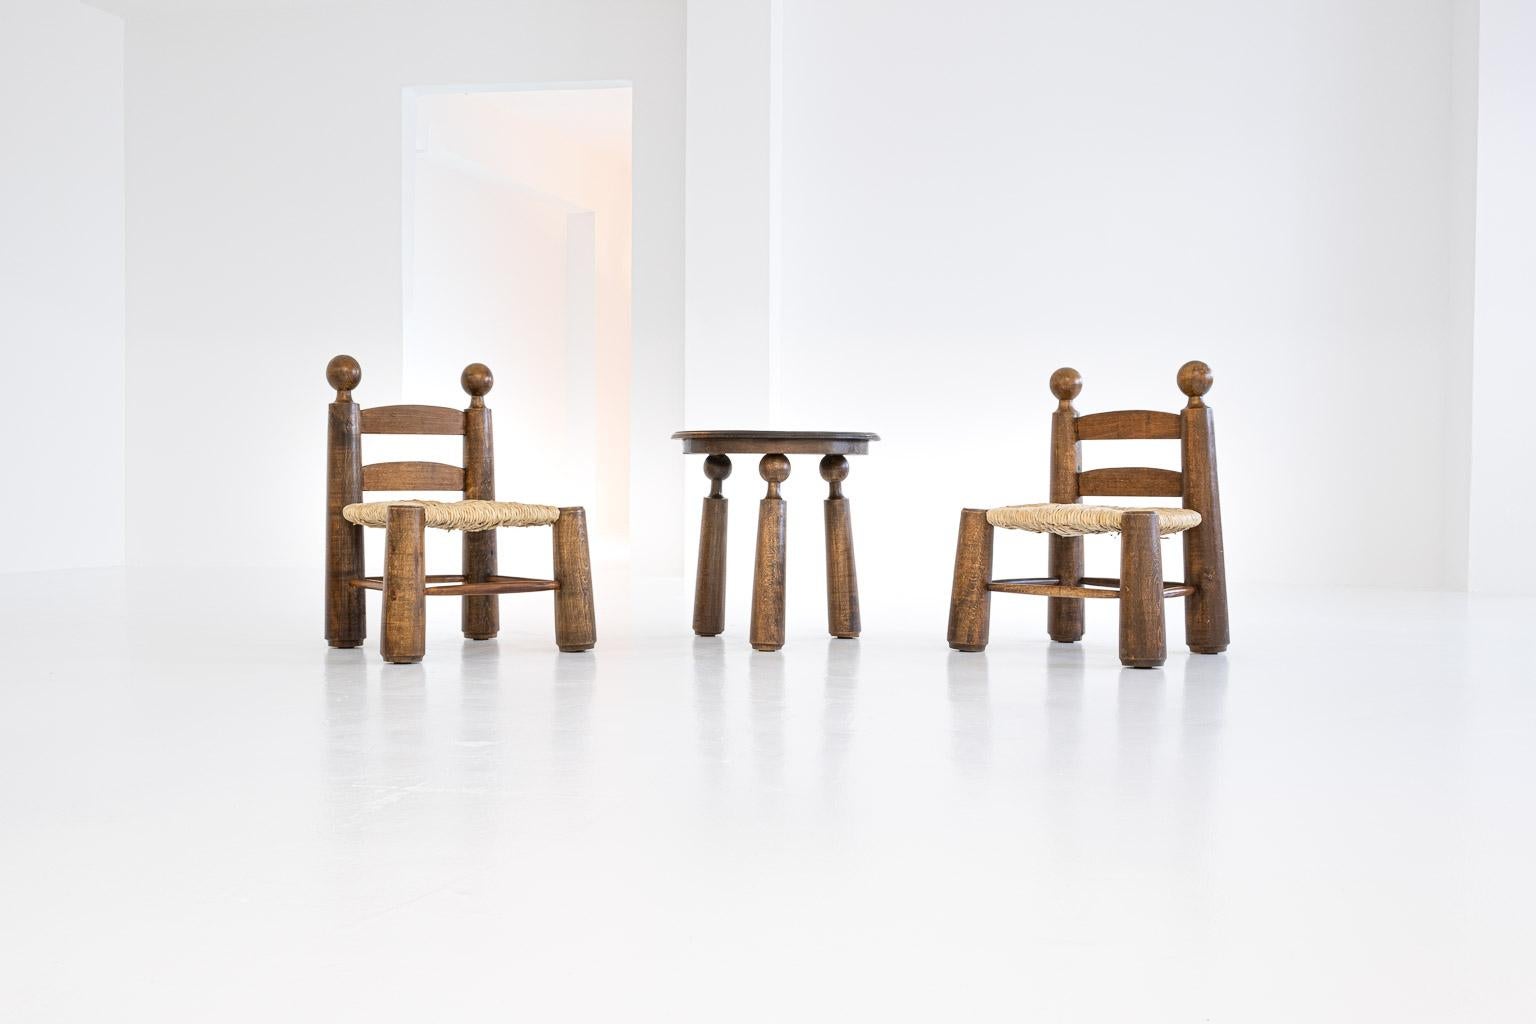 Set of two small chairs and a table by Charles Dudouyt, probably 1940s, solid oak, seats in rye straw, reupholstered after the original.

Measures: Chairs: height: 64 cm, seat height: 31 cm, width: 46 cm, depth: 43 cm
Table: height: 49 cm, diameter: